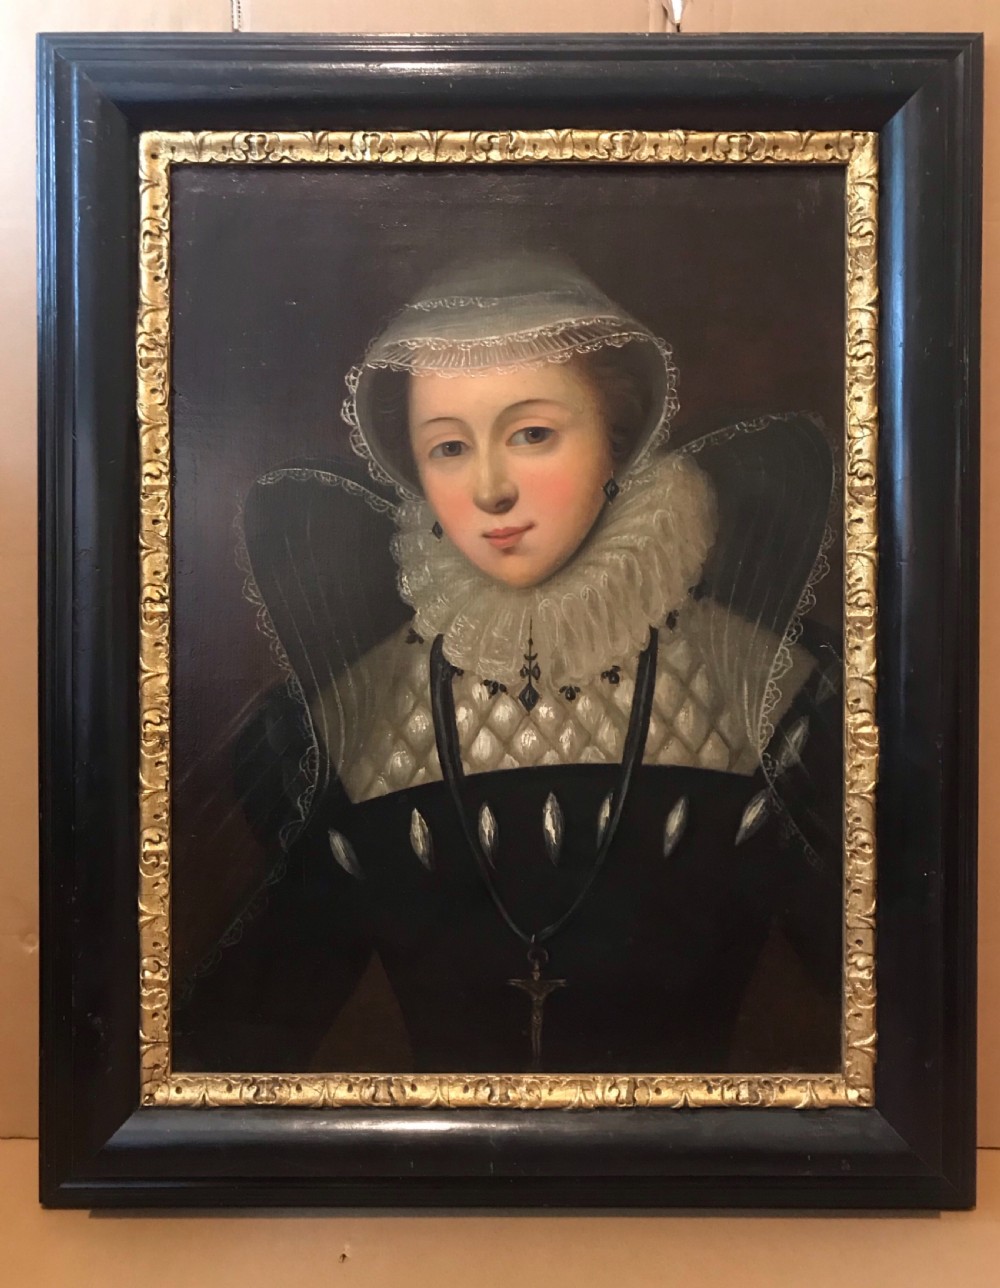 mary queen of scots oil portrait after nicholas hilliard 18th century oil paintings